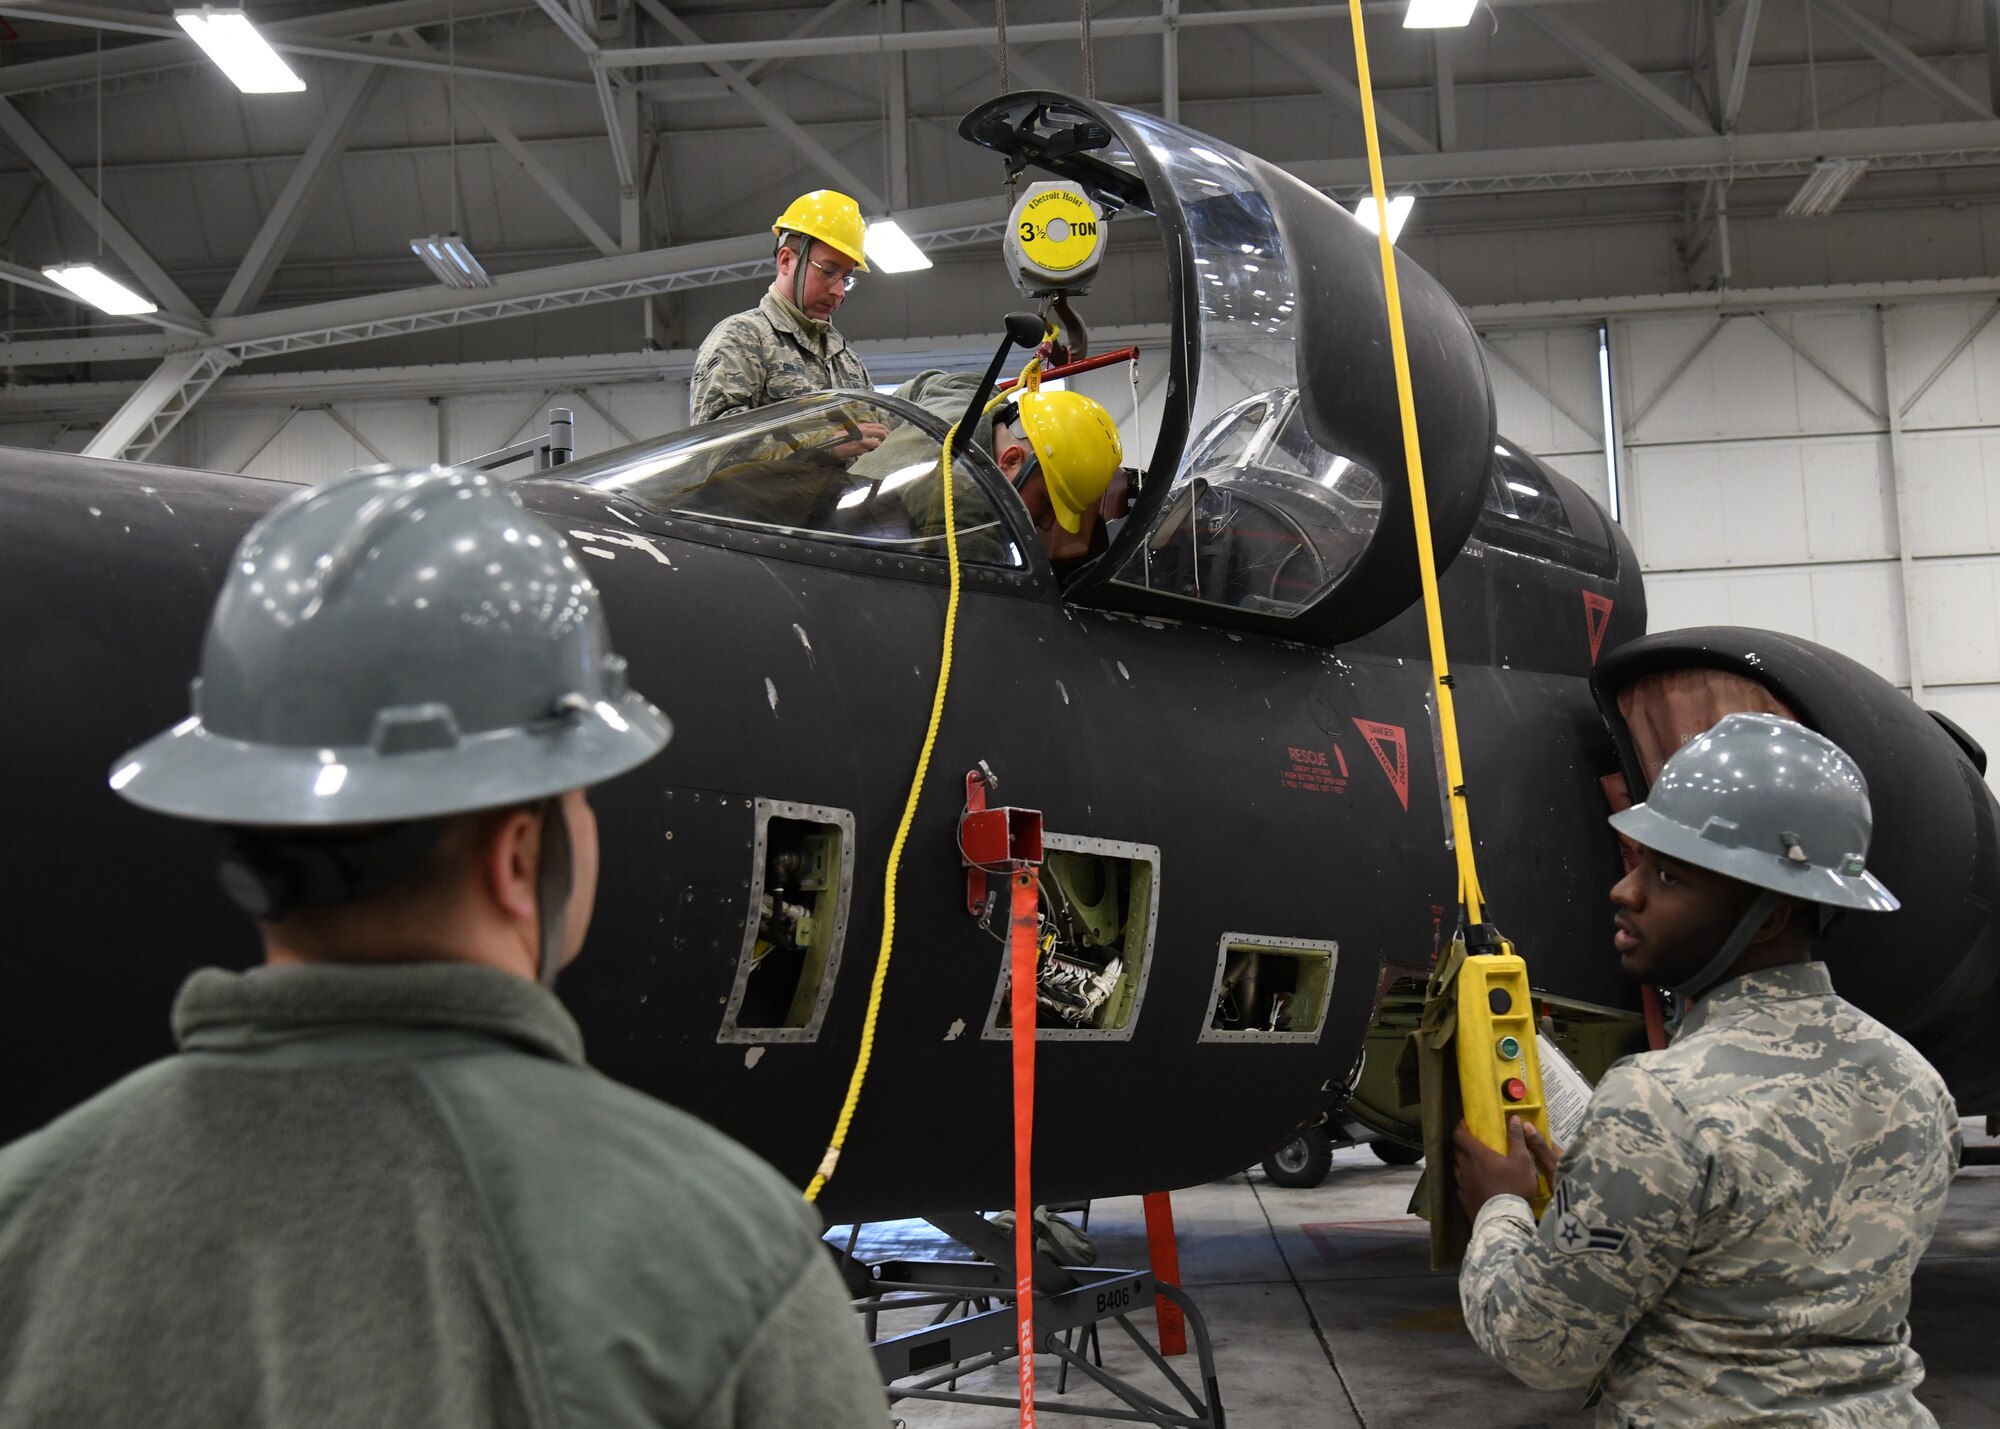 9th Maintenance Squadron aircrew egress Airmen install a U-2 Dragon Lady egress seat, Jan. 16, 2020 at Beale Air Force Base, California. To guarantee the proper functioning of egress systems, these professionals perform maintenance regularly, conduct full diagnostic inspections of egress systems, check for any broken components, and swap out any time-changeable items that have expired.